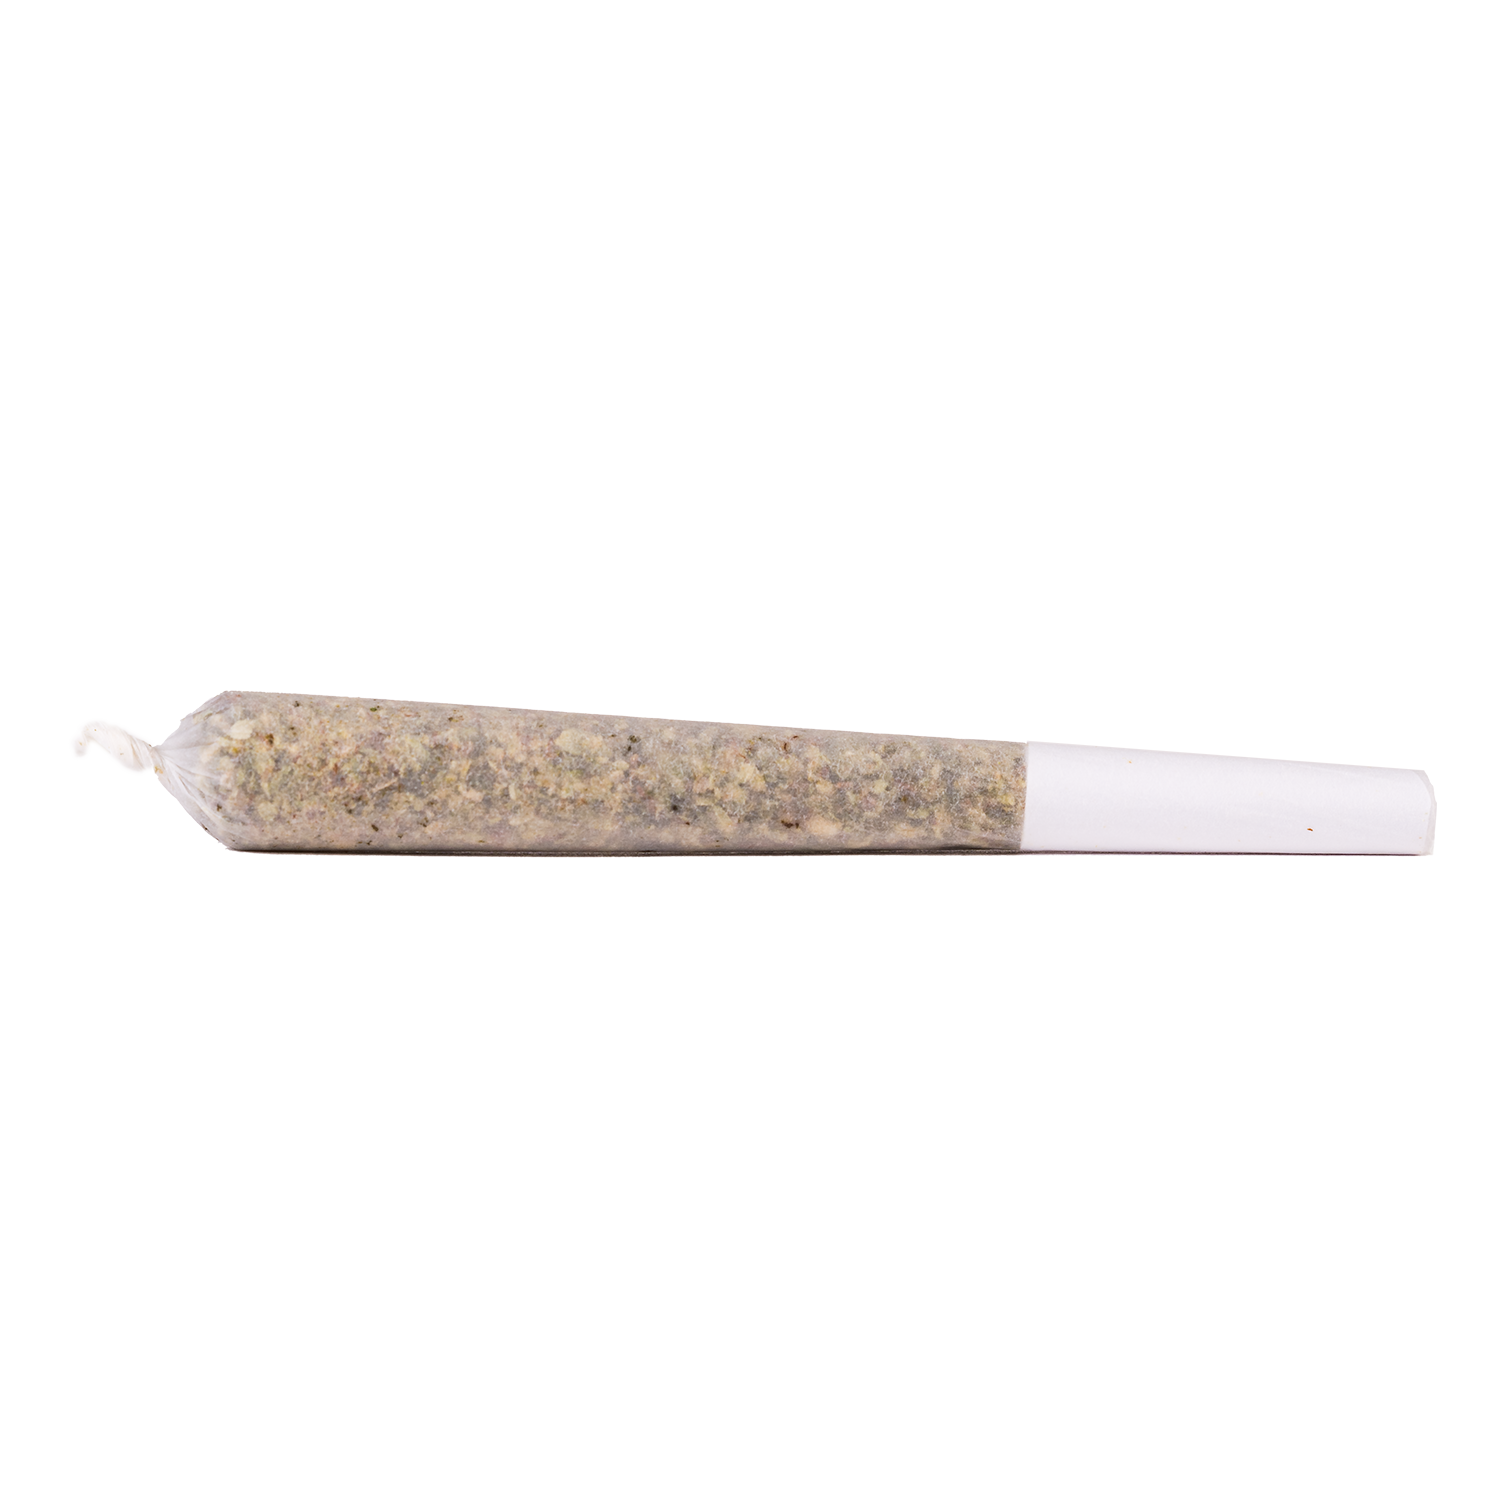 Barb Live Rosin Infused Pre-Rolls